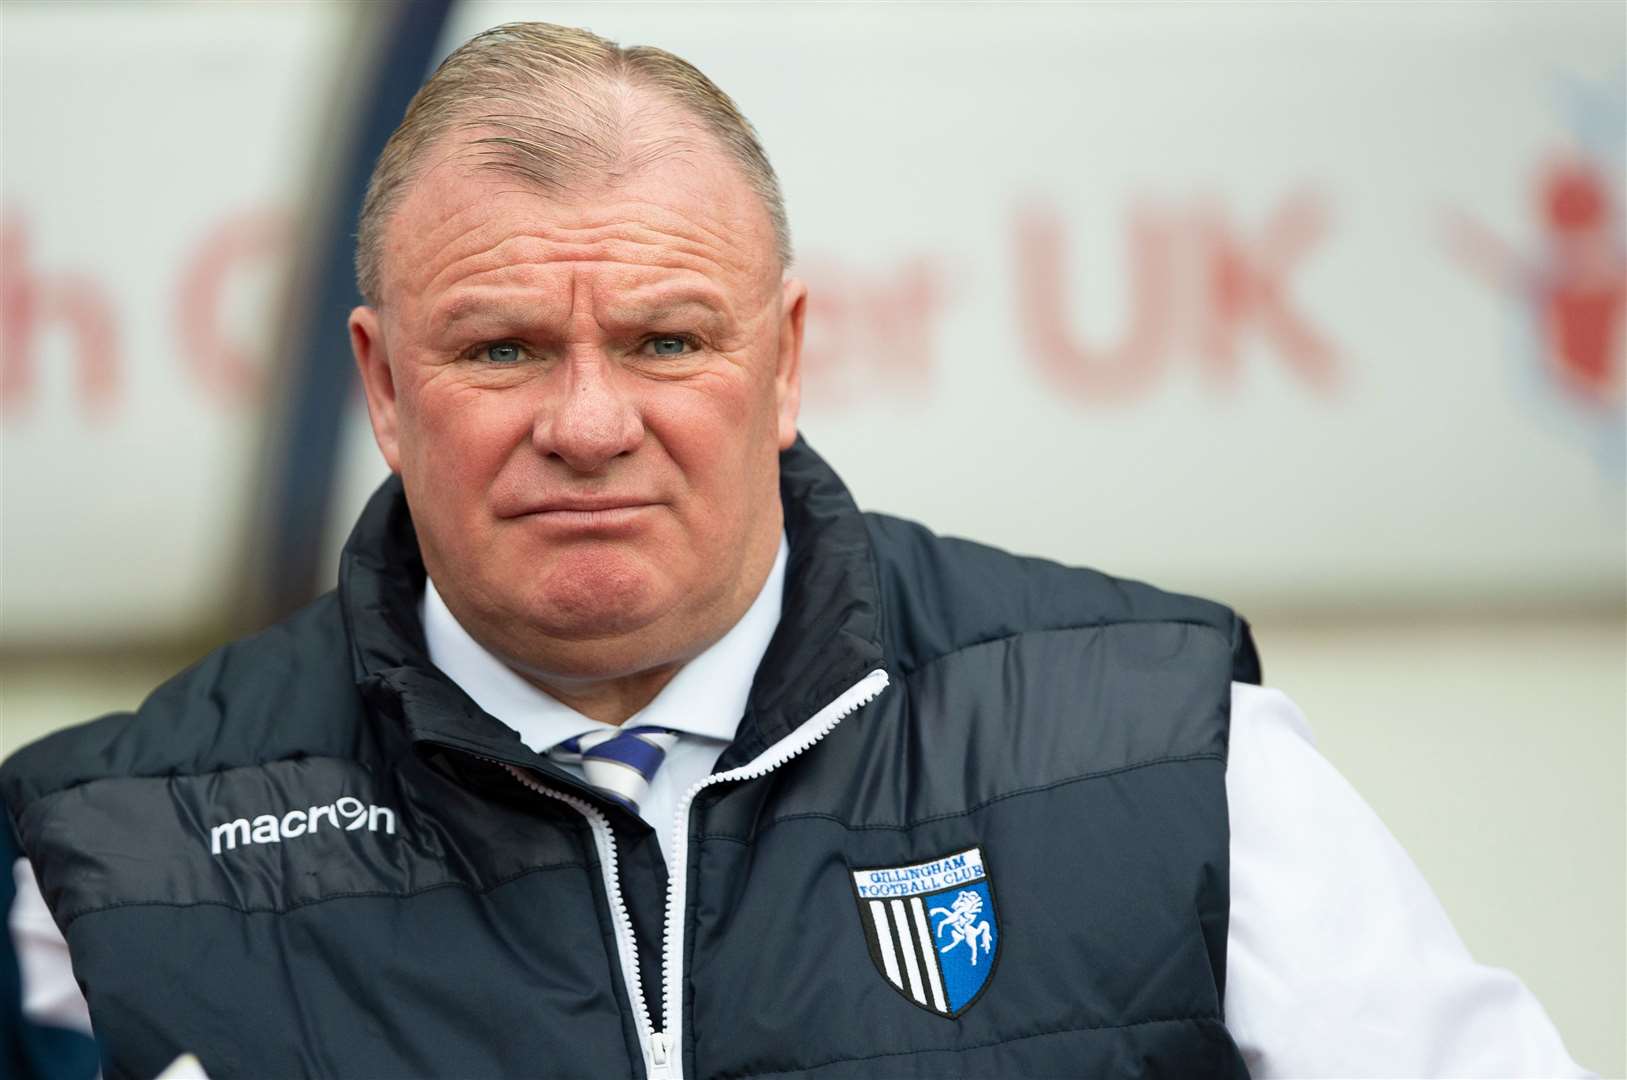 The wait goes on for the Gills to find out when and how the season will end